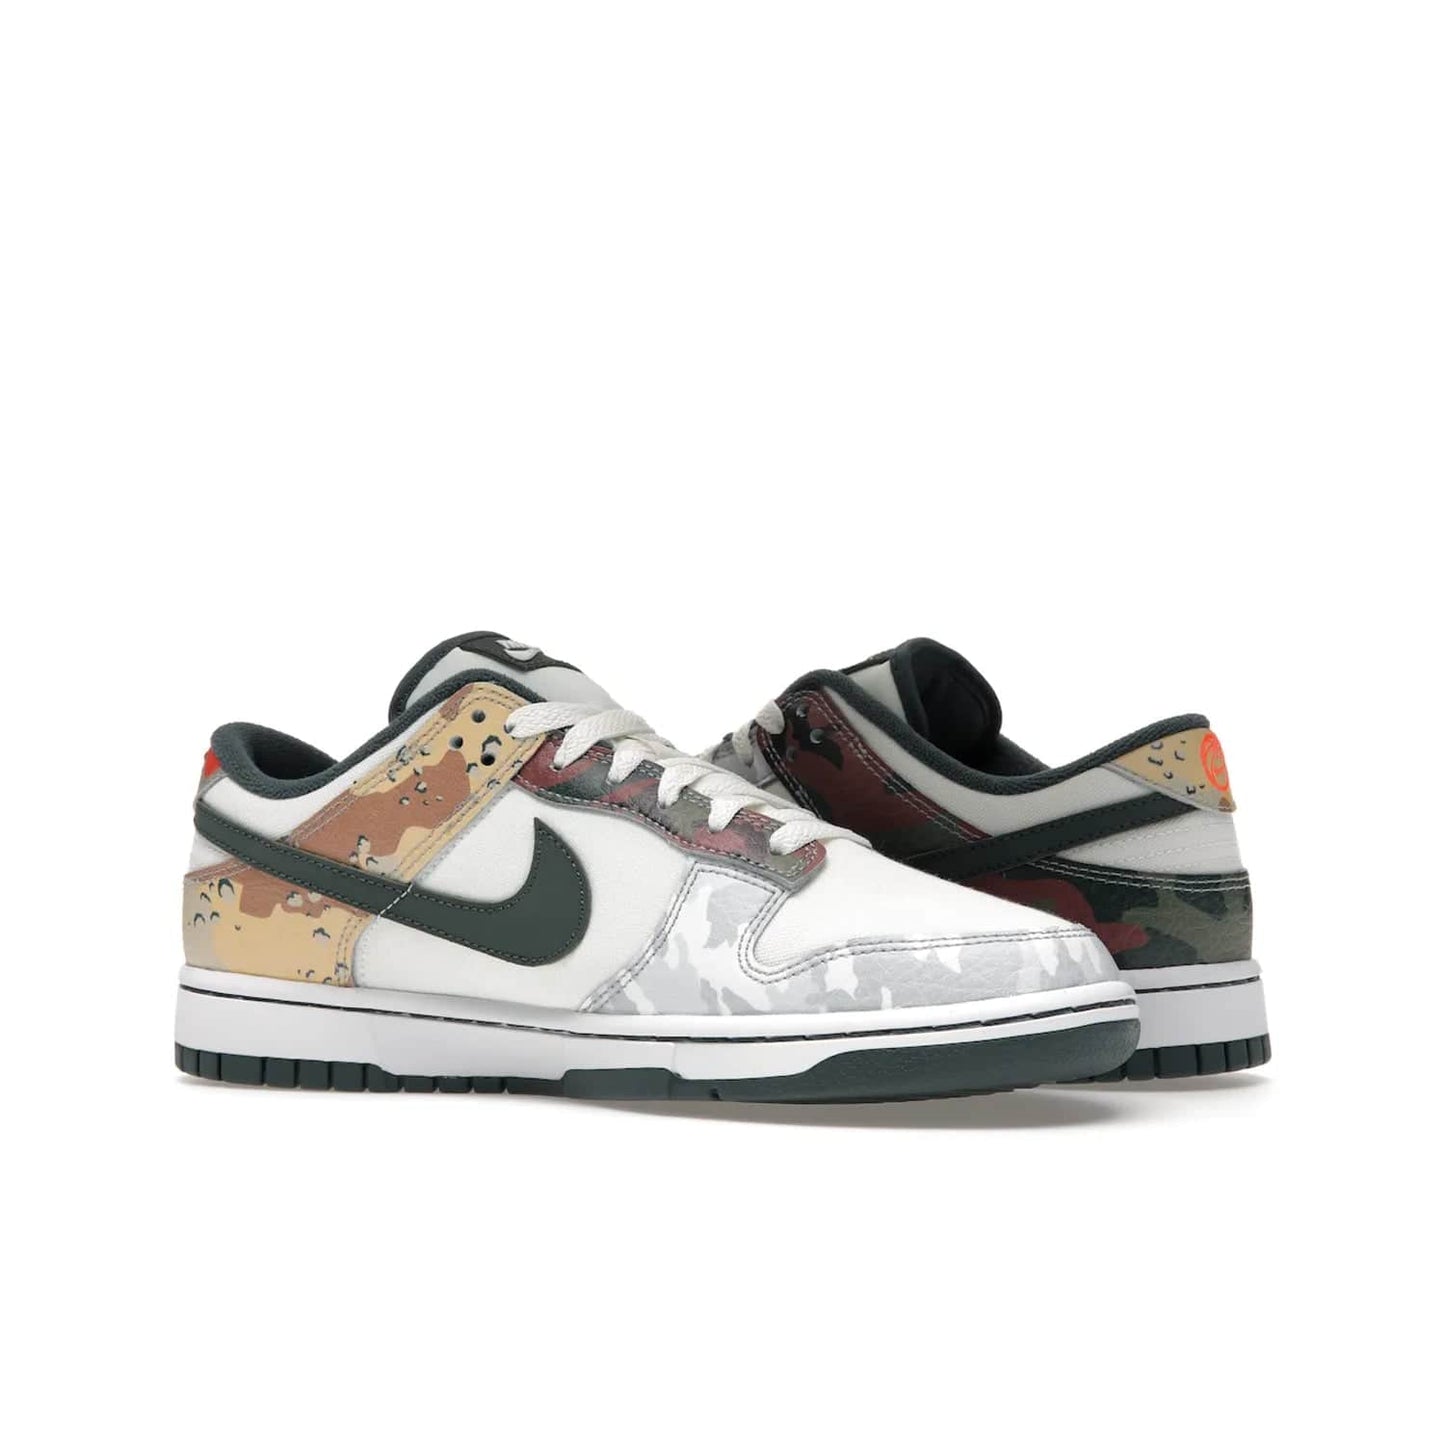 Nike Dunk Low SE Sail Multi-Camo - Image 22 - Only at www.BallersClubKickz.com - Classic design meets statement style in the Nike Dunk Low SE Sail Multi-Camo. White leather base with multi-color camo overlays, vibrant Nike Swooshes, and orange Nike embroidery. Get yours August 2021.